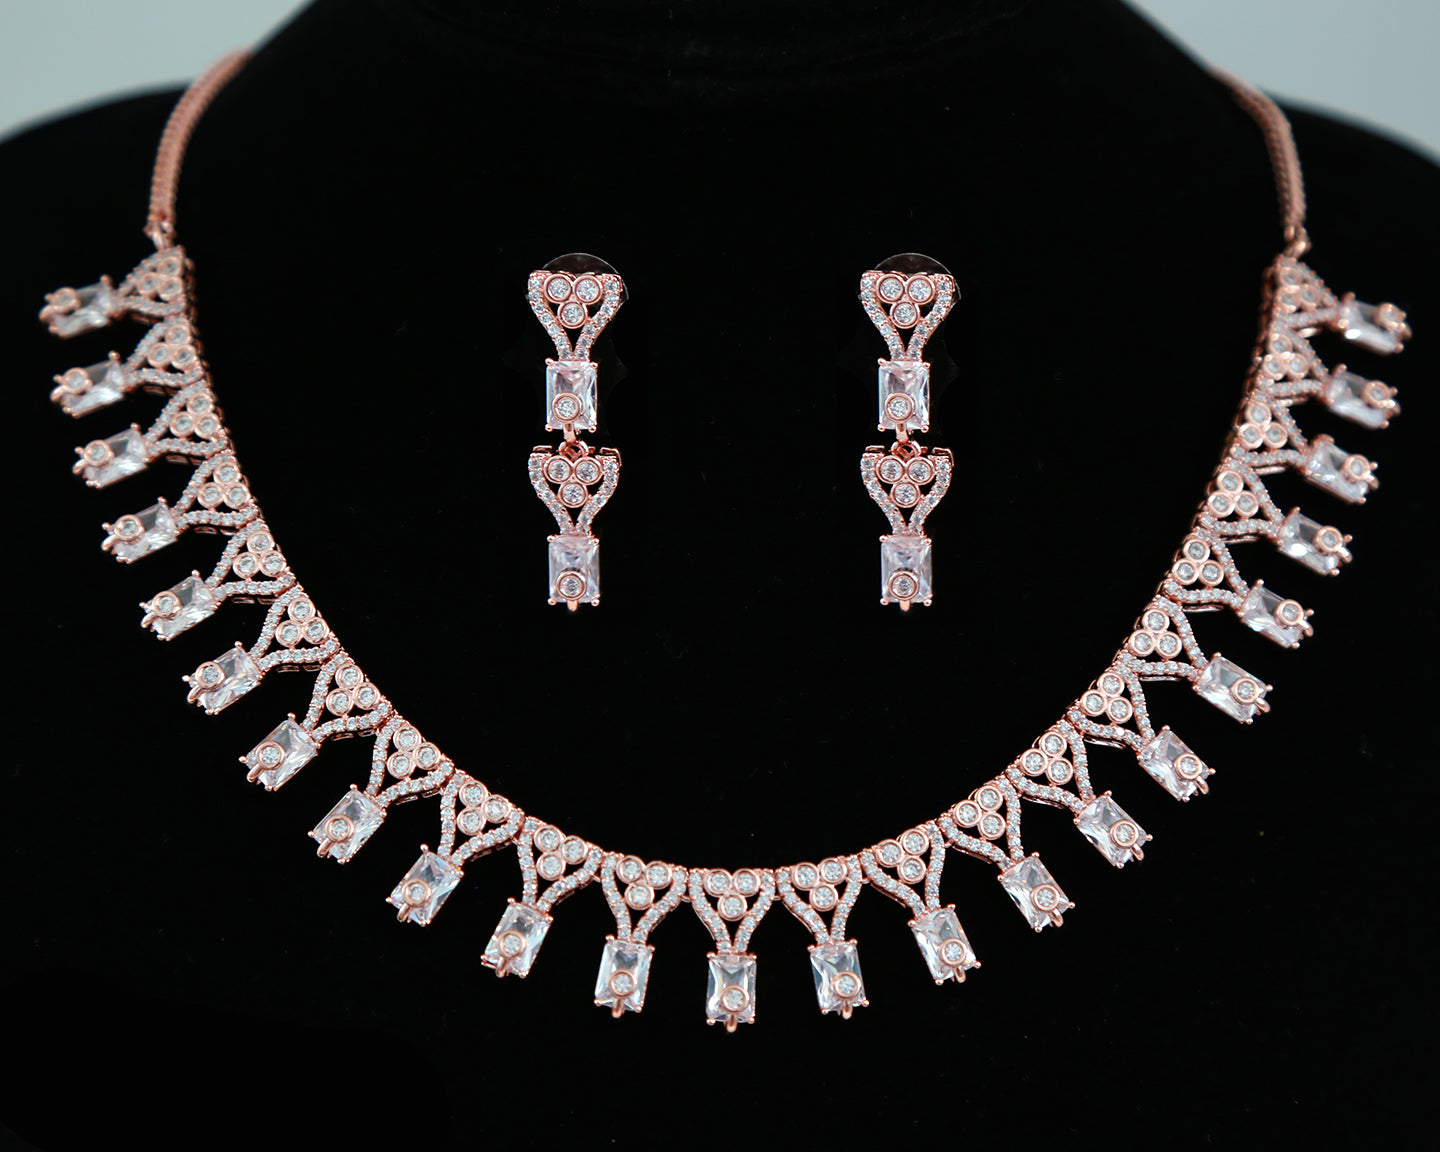 Mint Green N Pink Diamond Necklace Set/ad Necklace 